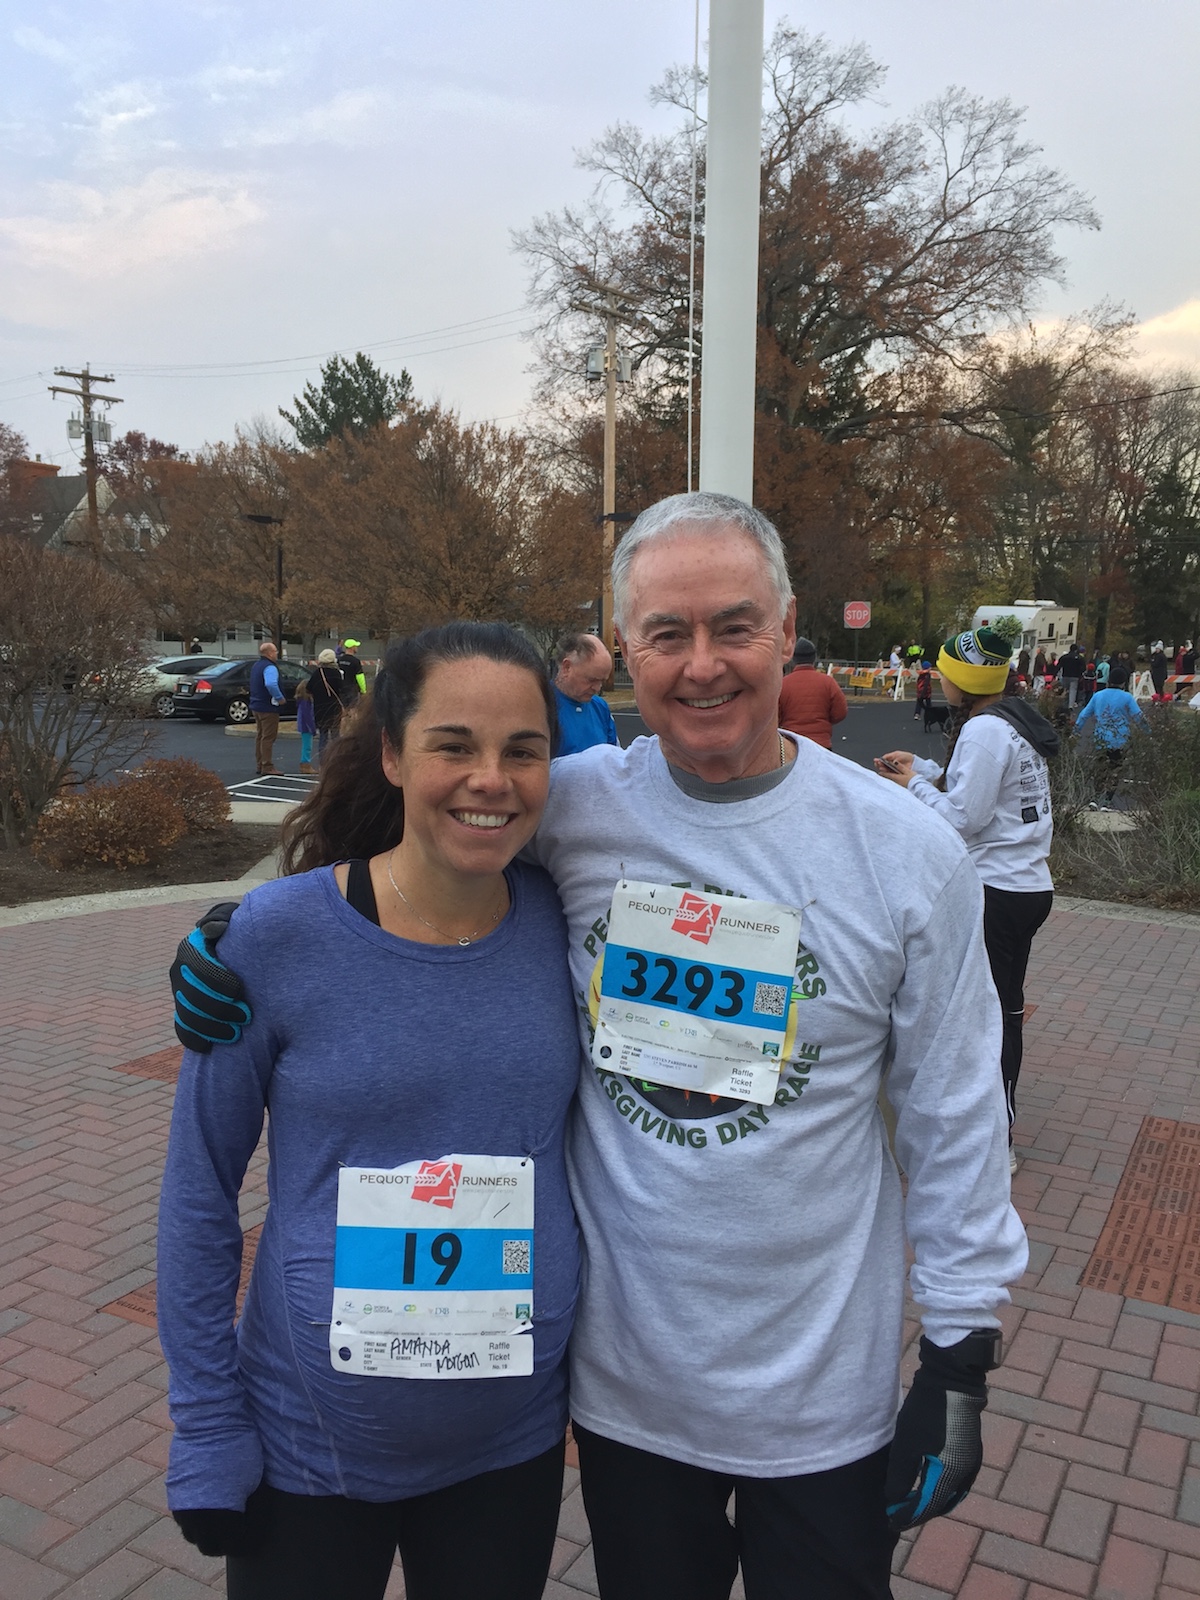 Amanda and her father at last year's Turkey Trot.